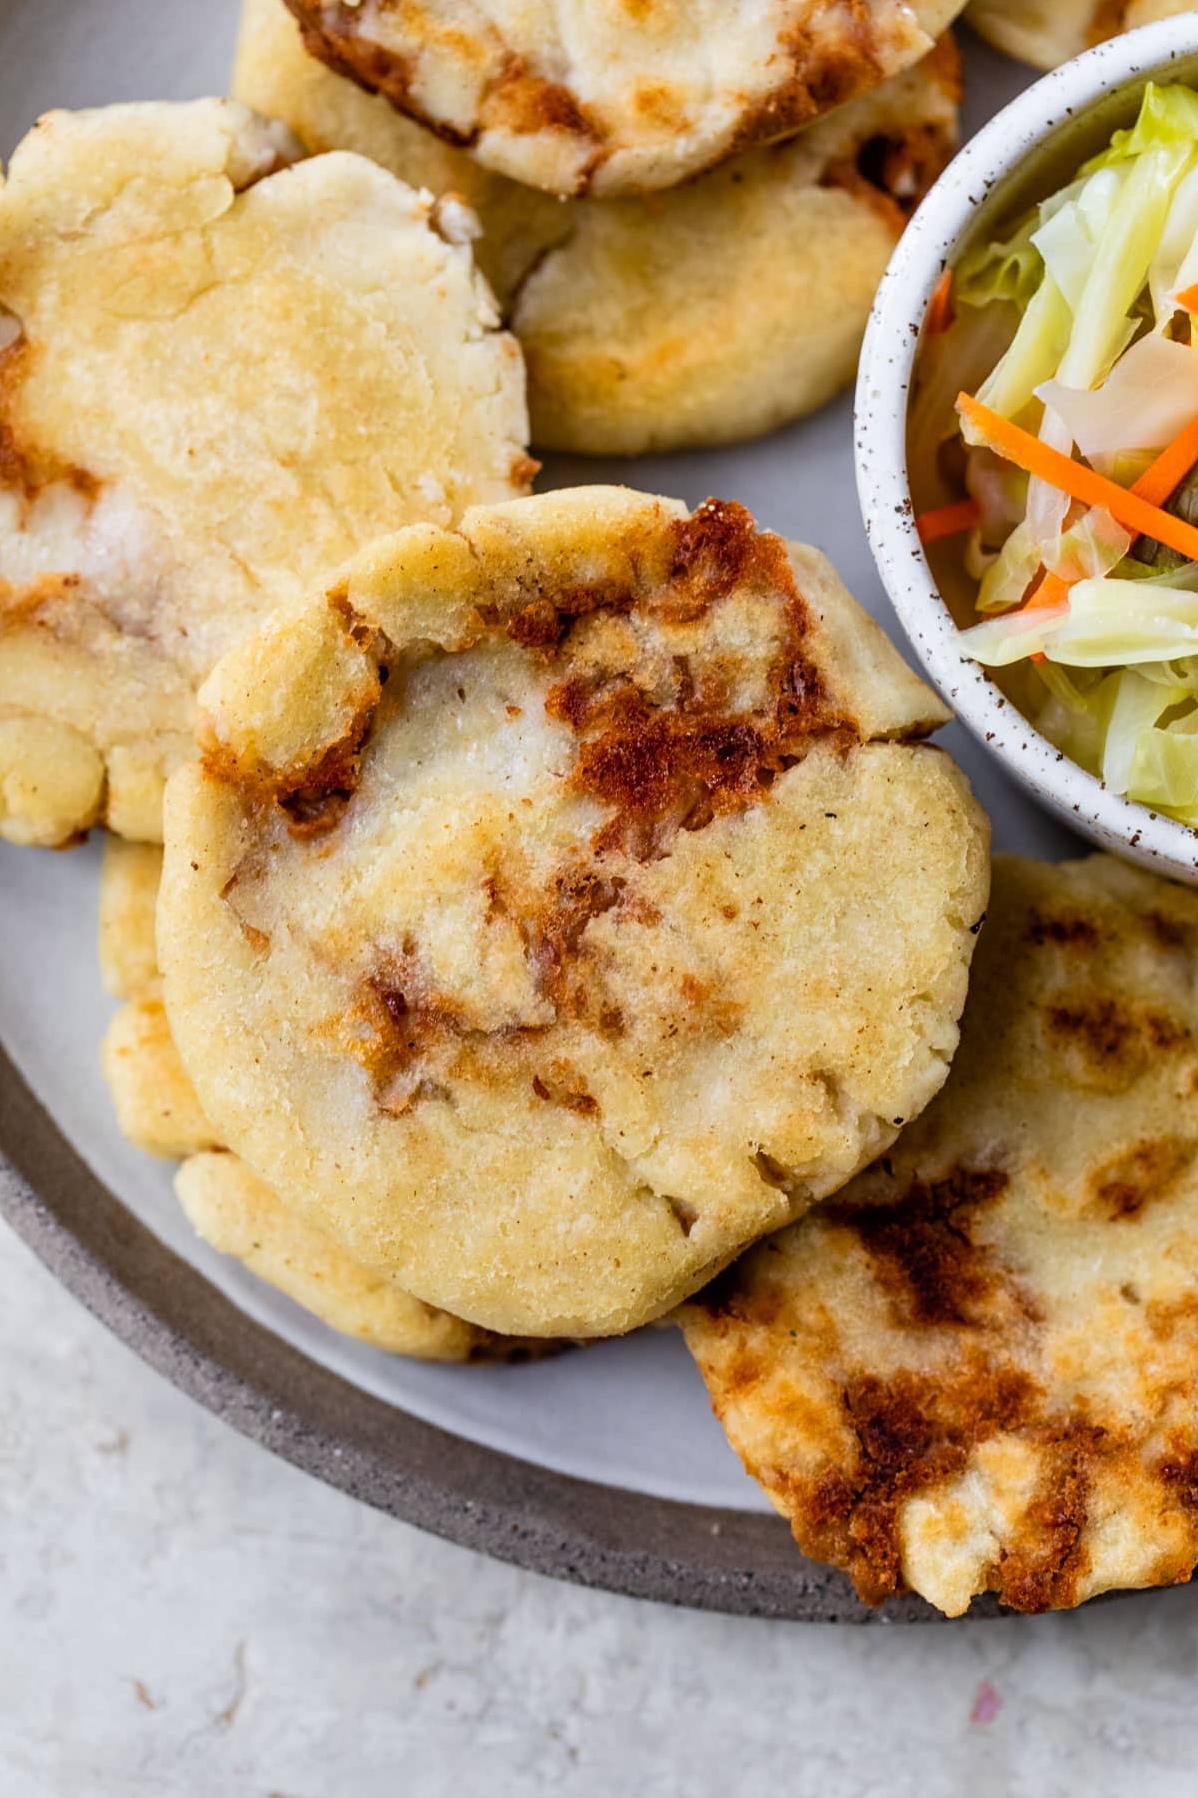  Perfectly cooked pupusas that will make your mouth water!